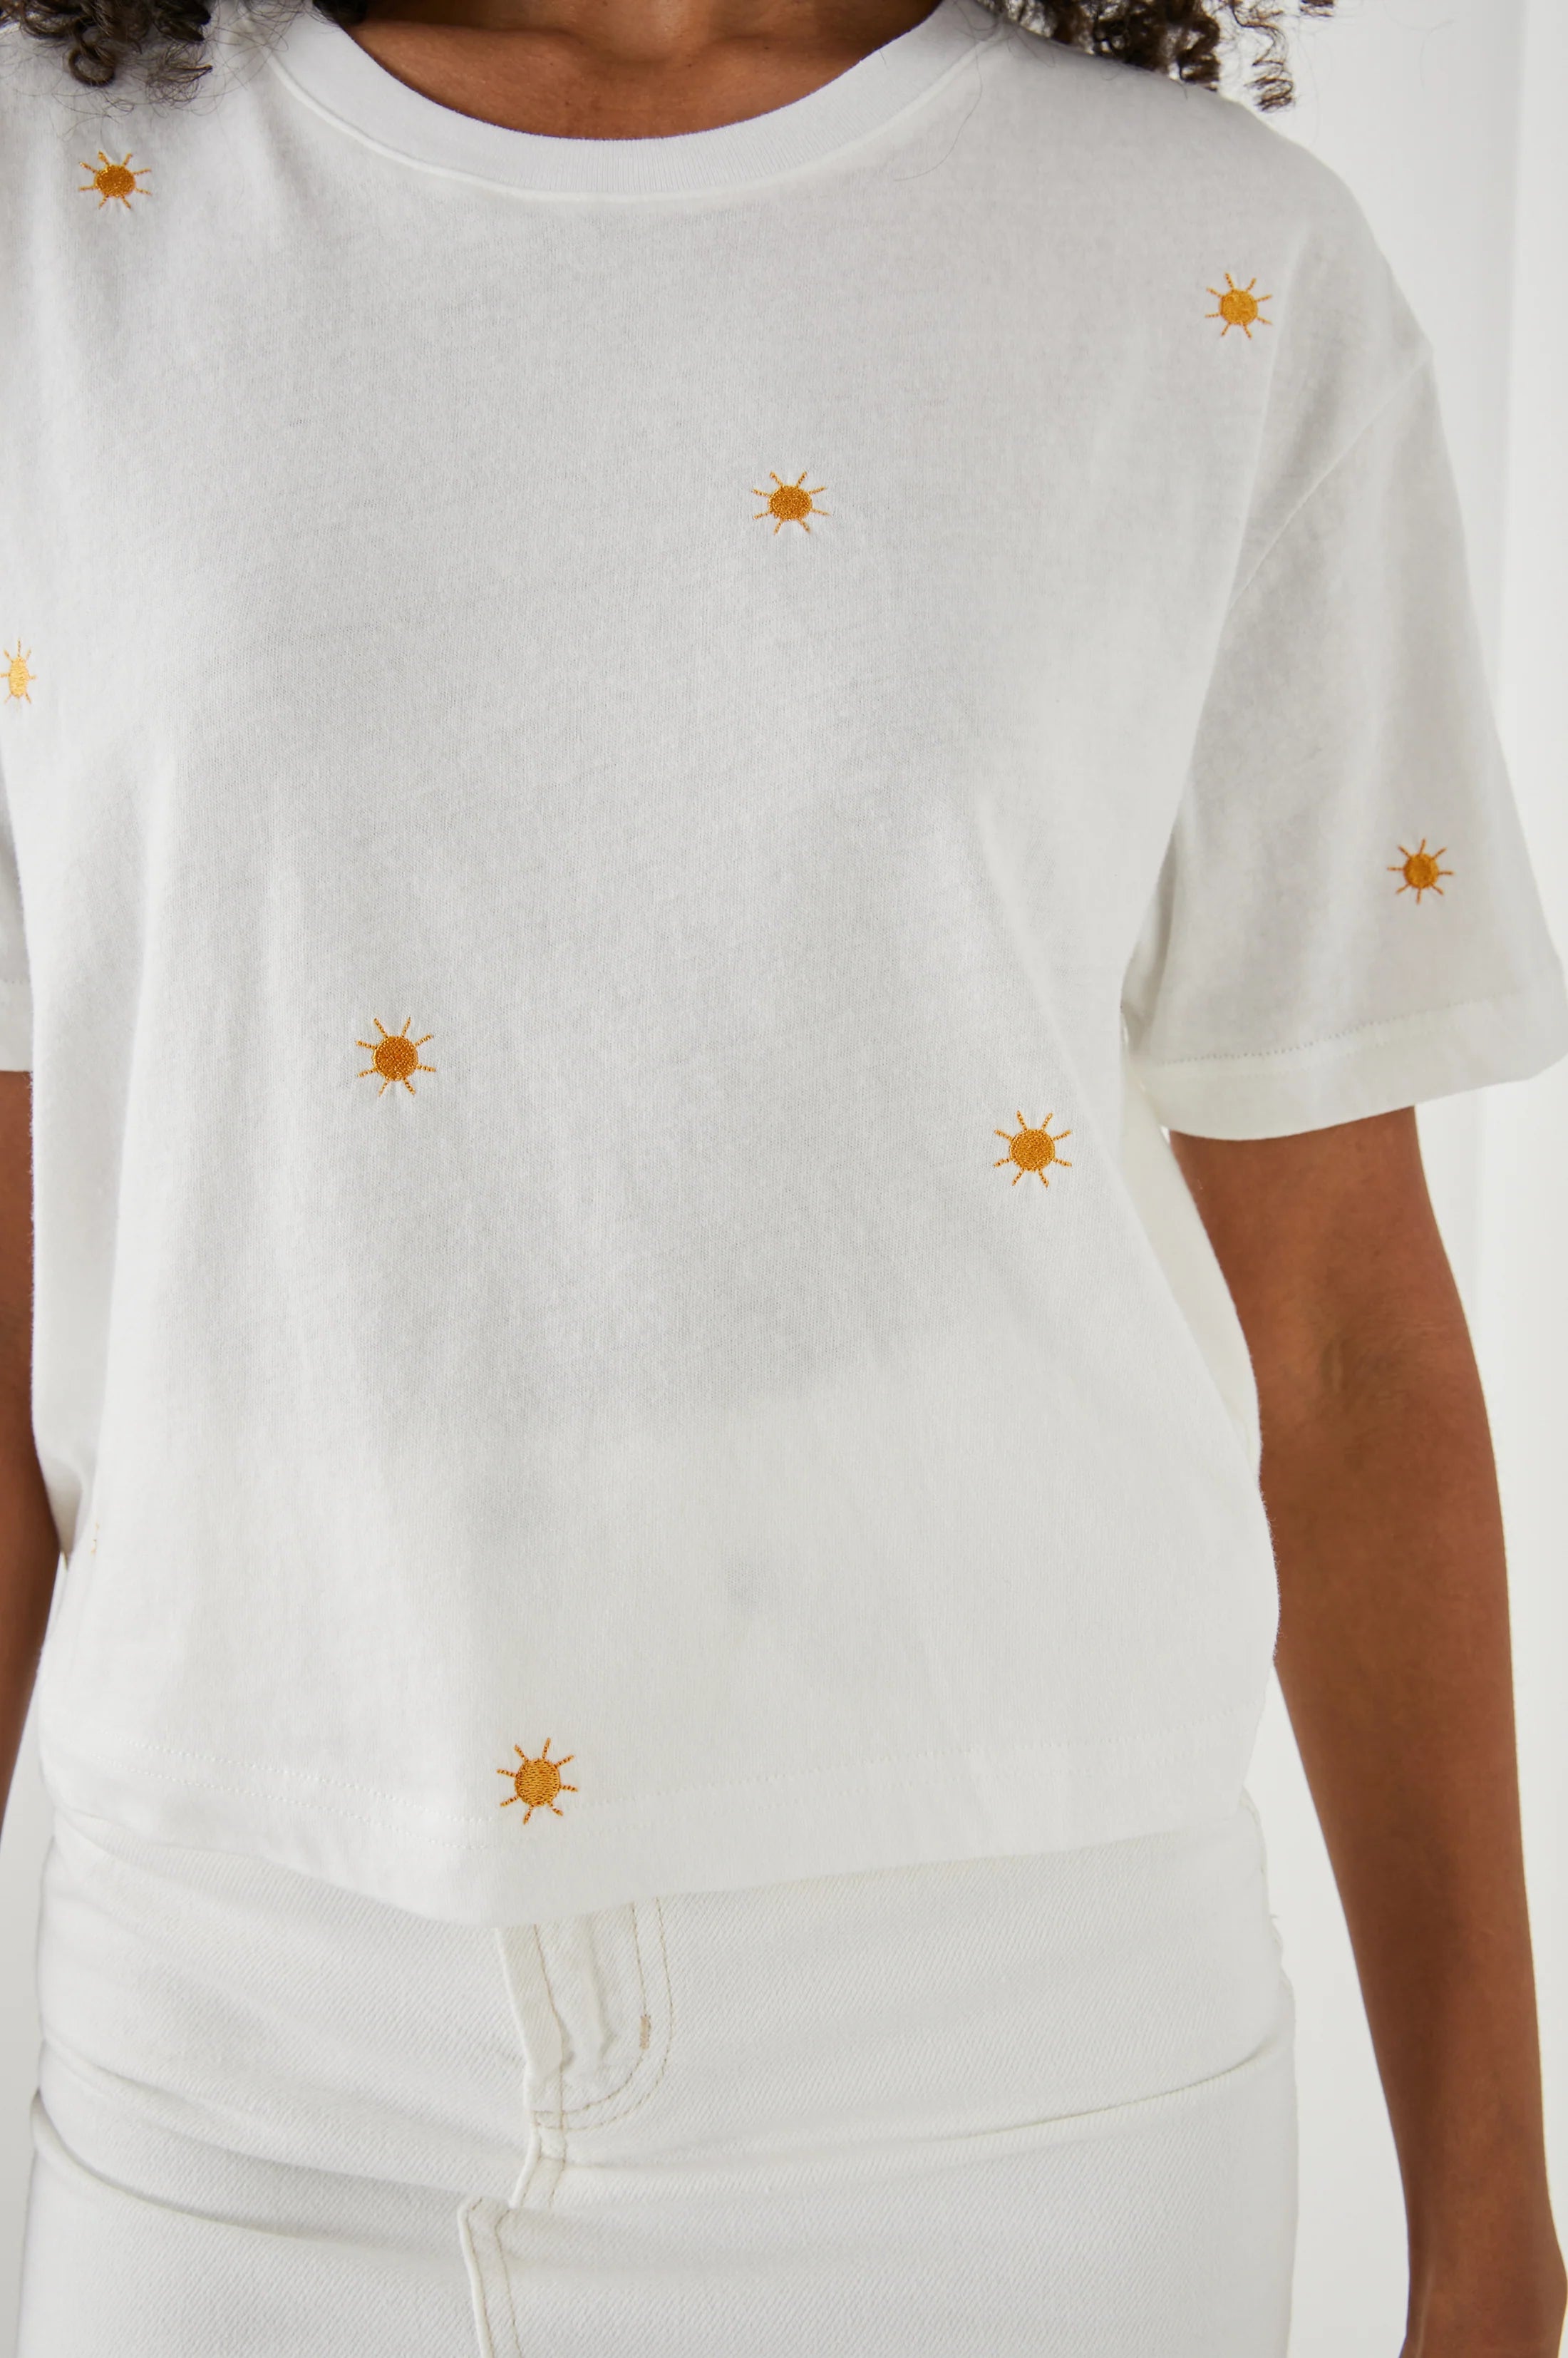 Embroidered Suns Boxy Crew